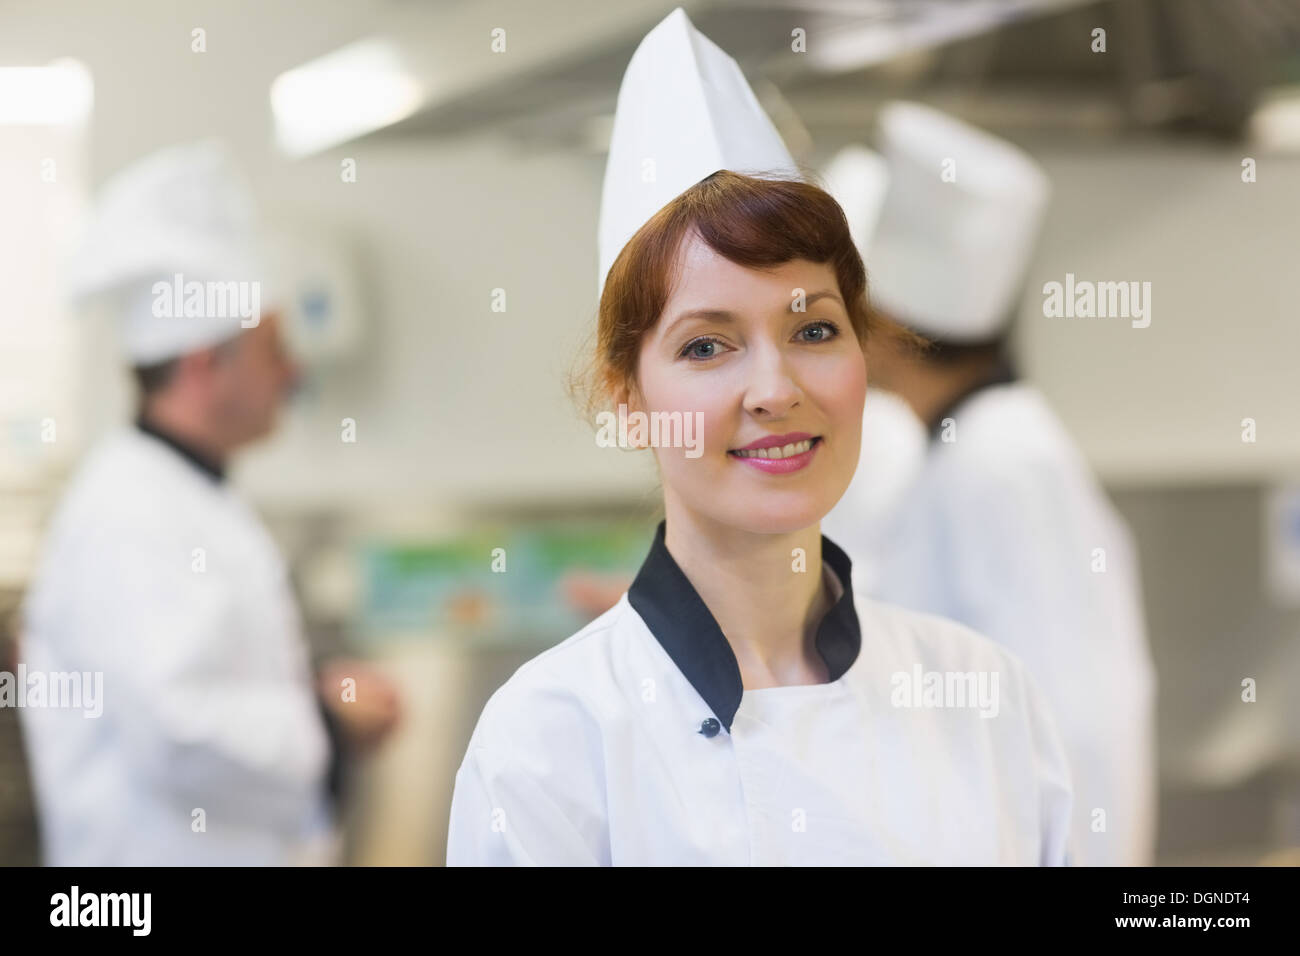 Female chef posing in a Kitchen Banque D'Images